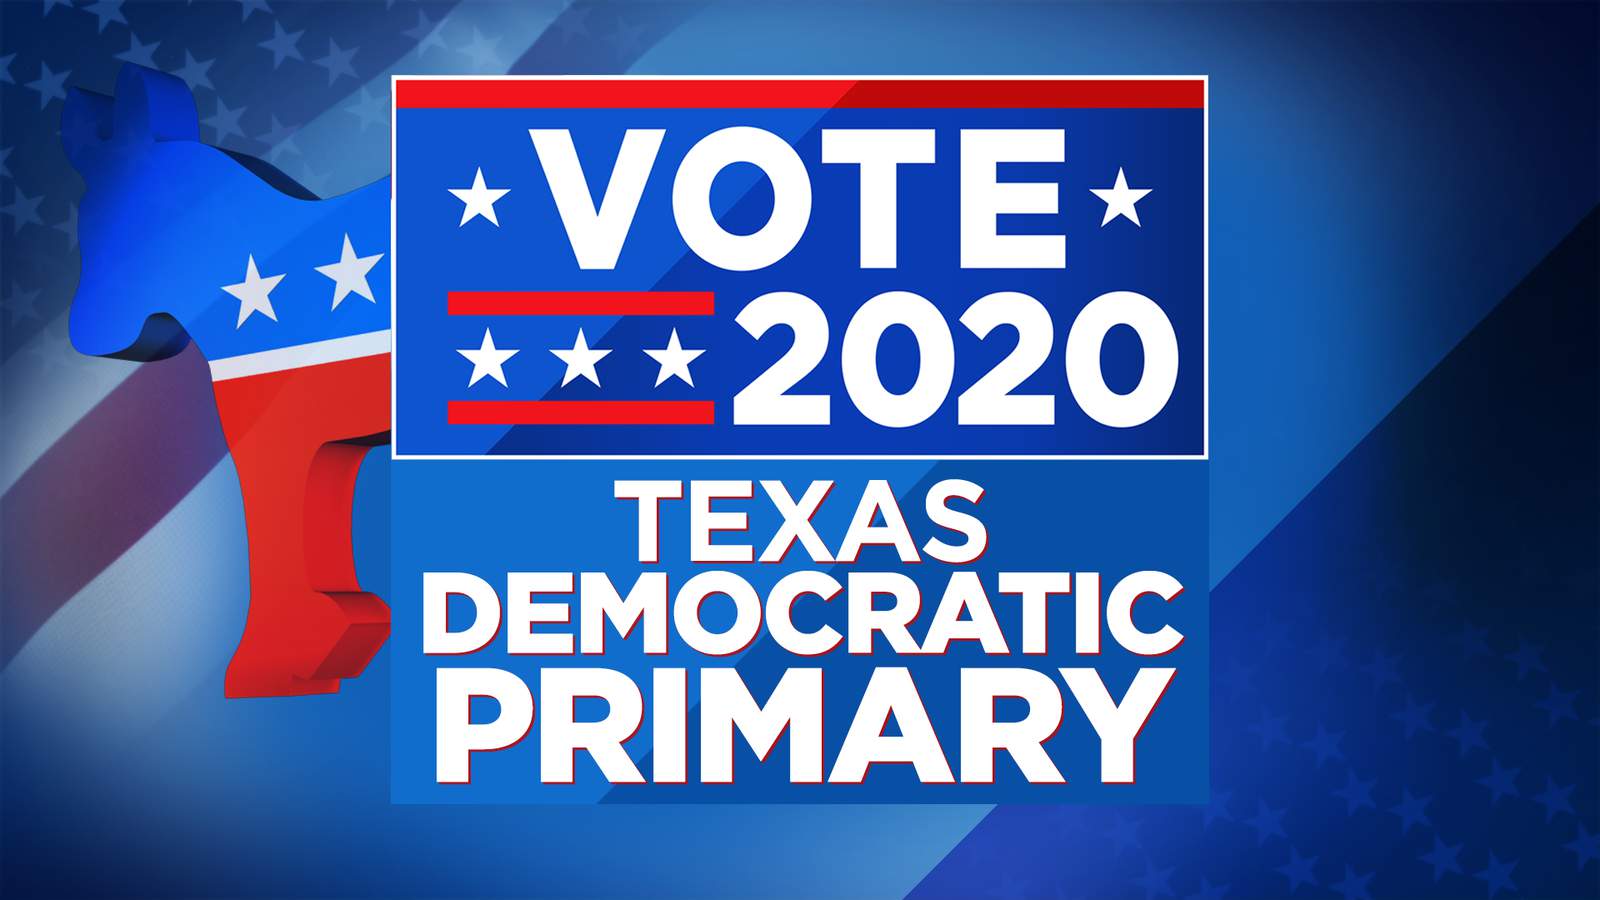 This is the 2020 Democratic March Primary ballot for Bexar County